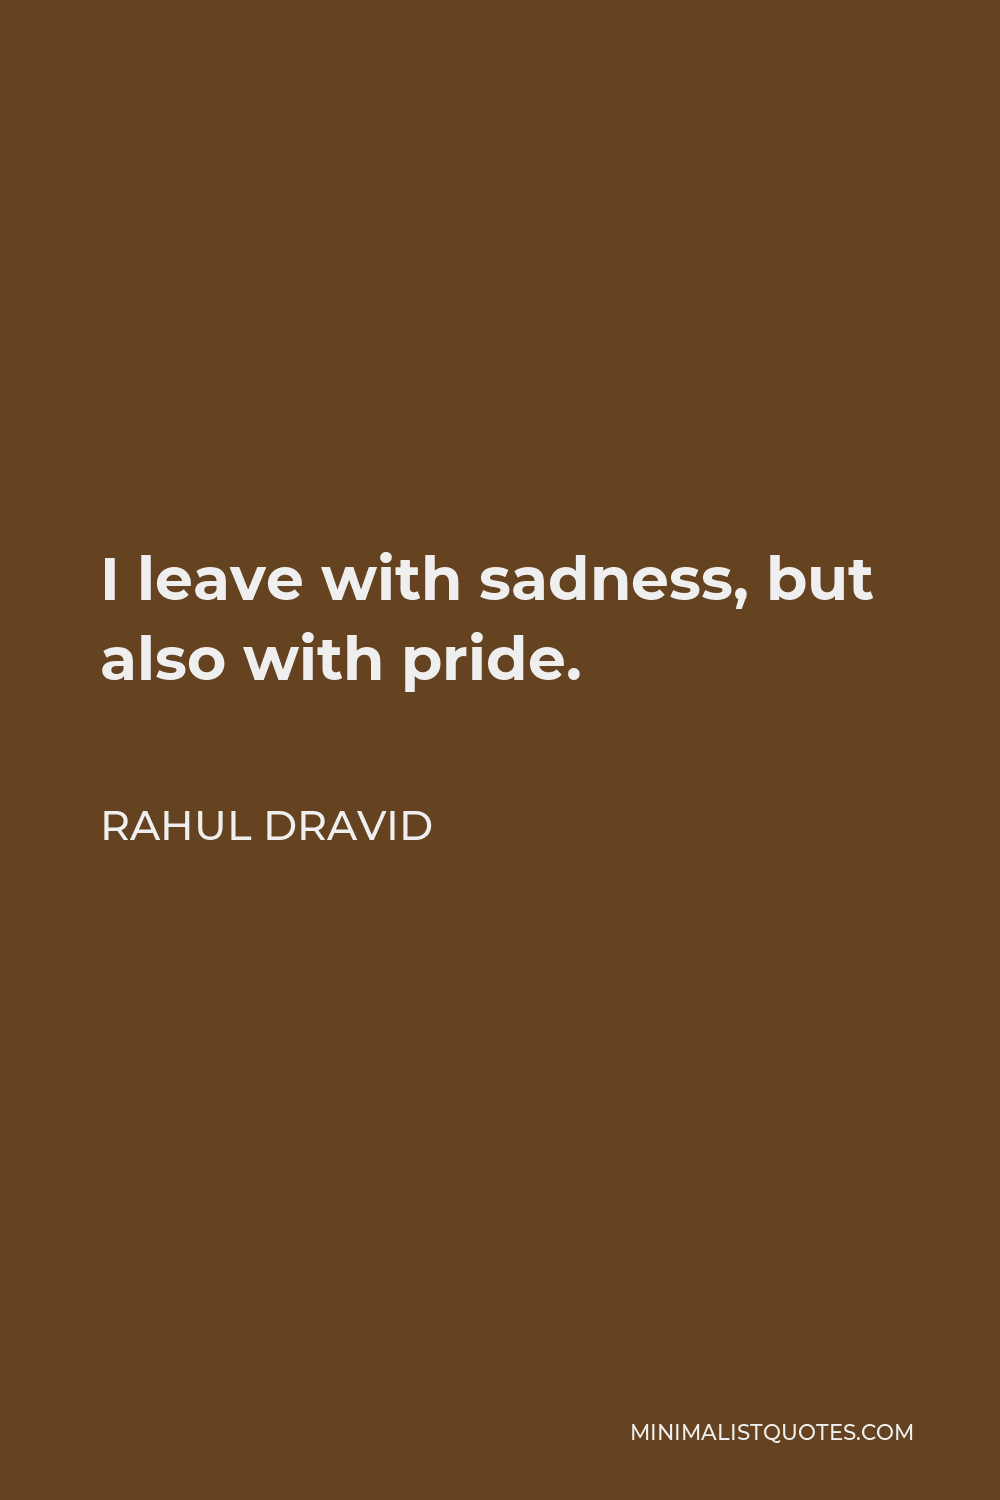 Rahul Dravid Quote - I leave with sadness, but also with pride.